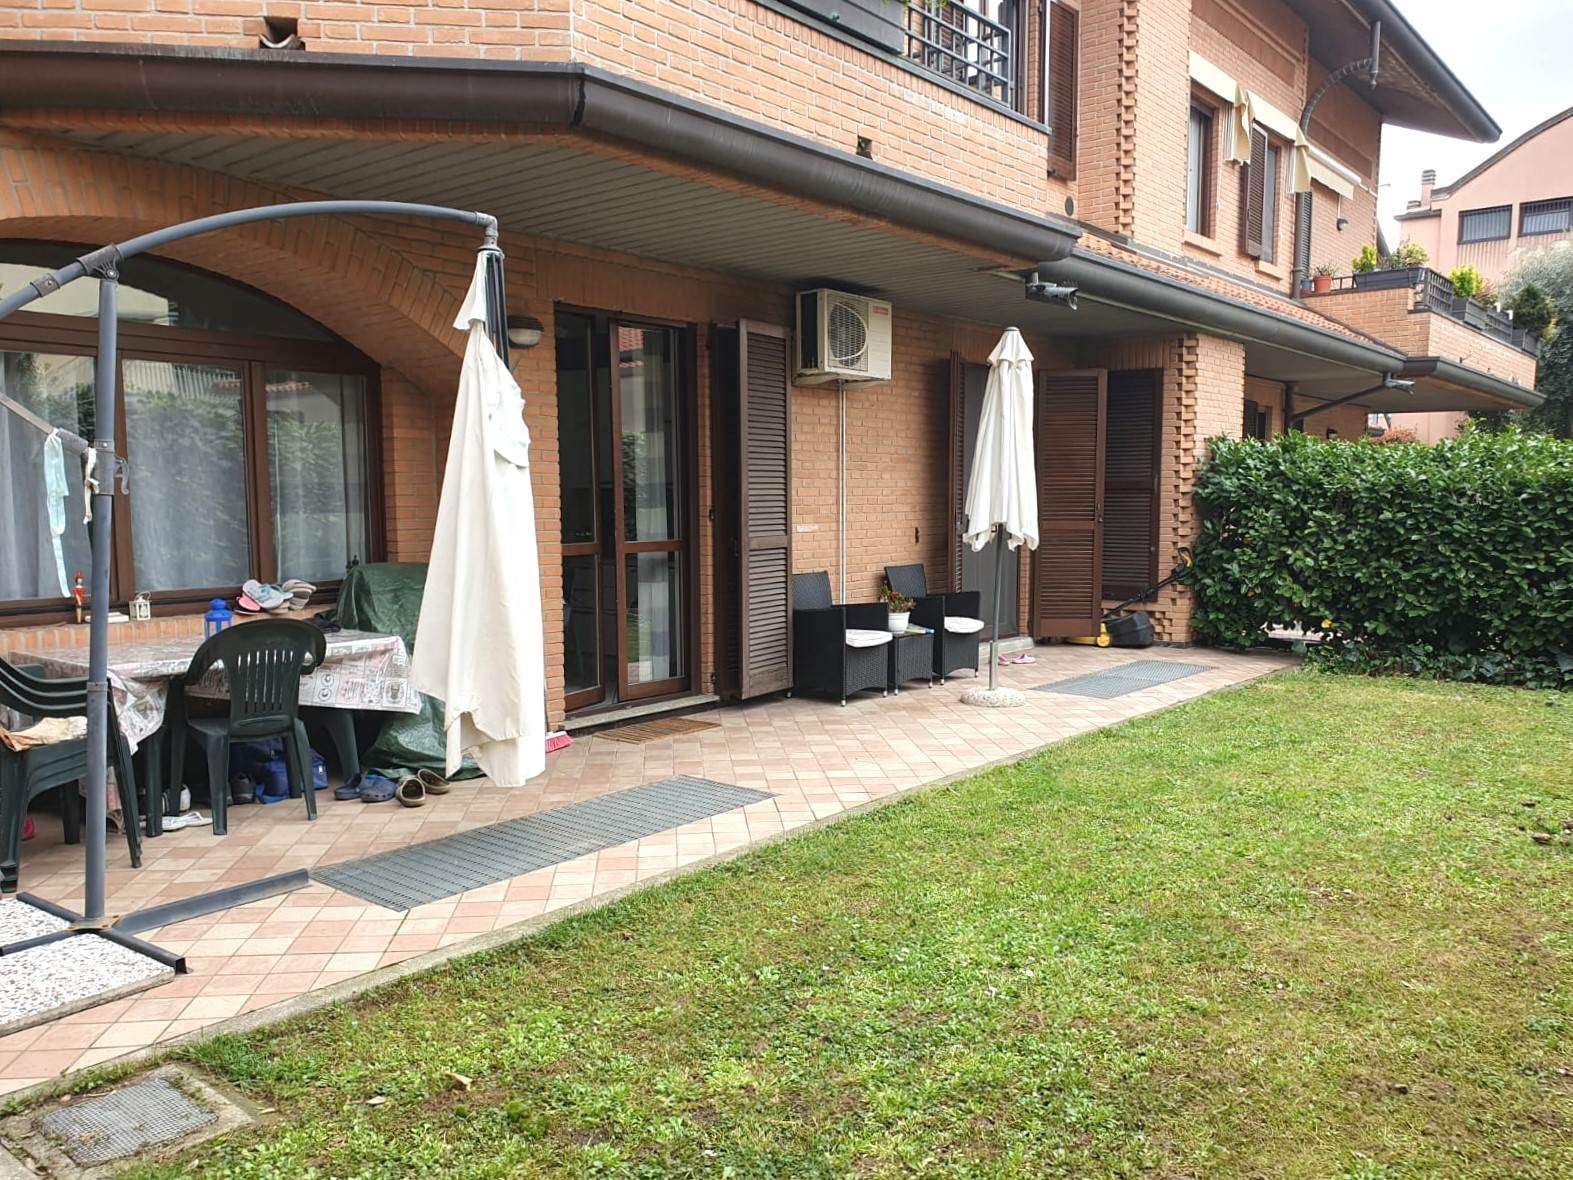 CINISELLO BALSAMO, Apartment for sale of 120 Sq. mt., Excellent Condition, Heating Individual heating system, Energetic class: G, Epi: 175 kwh/m2 